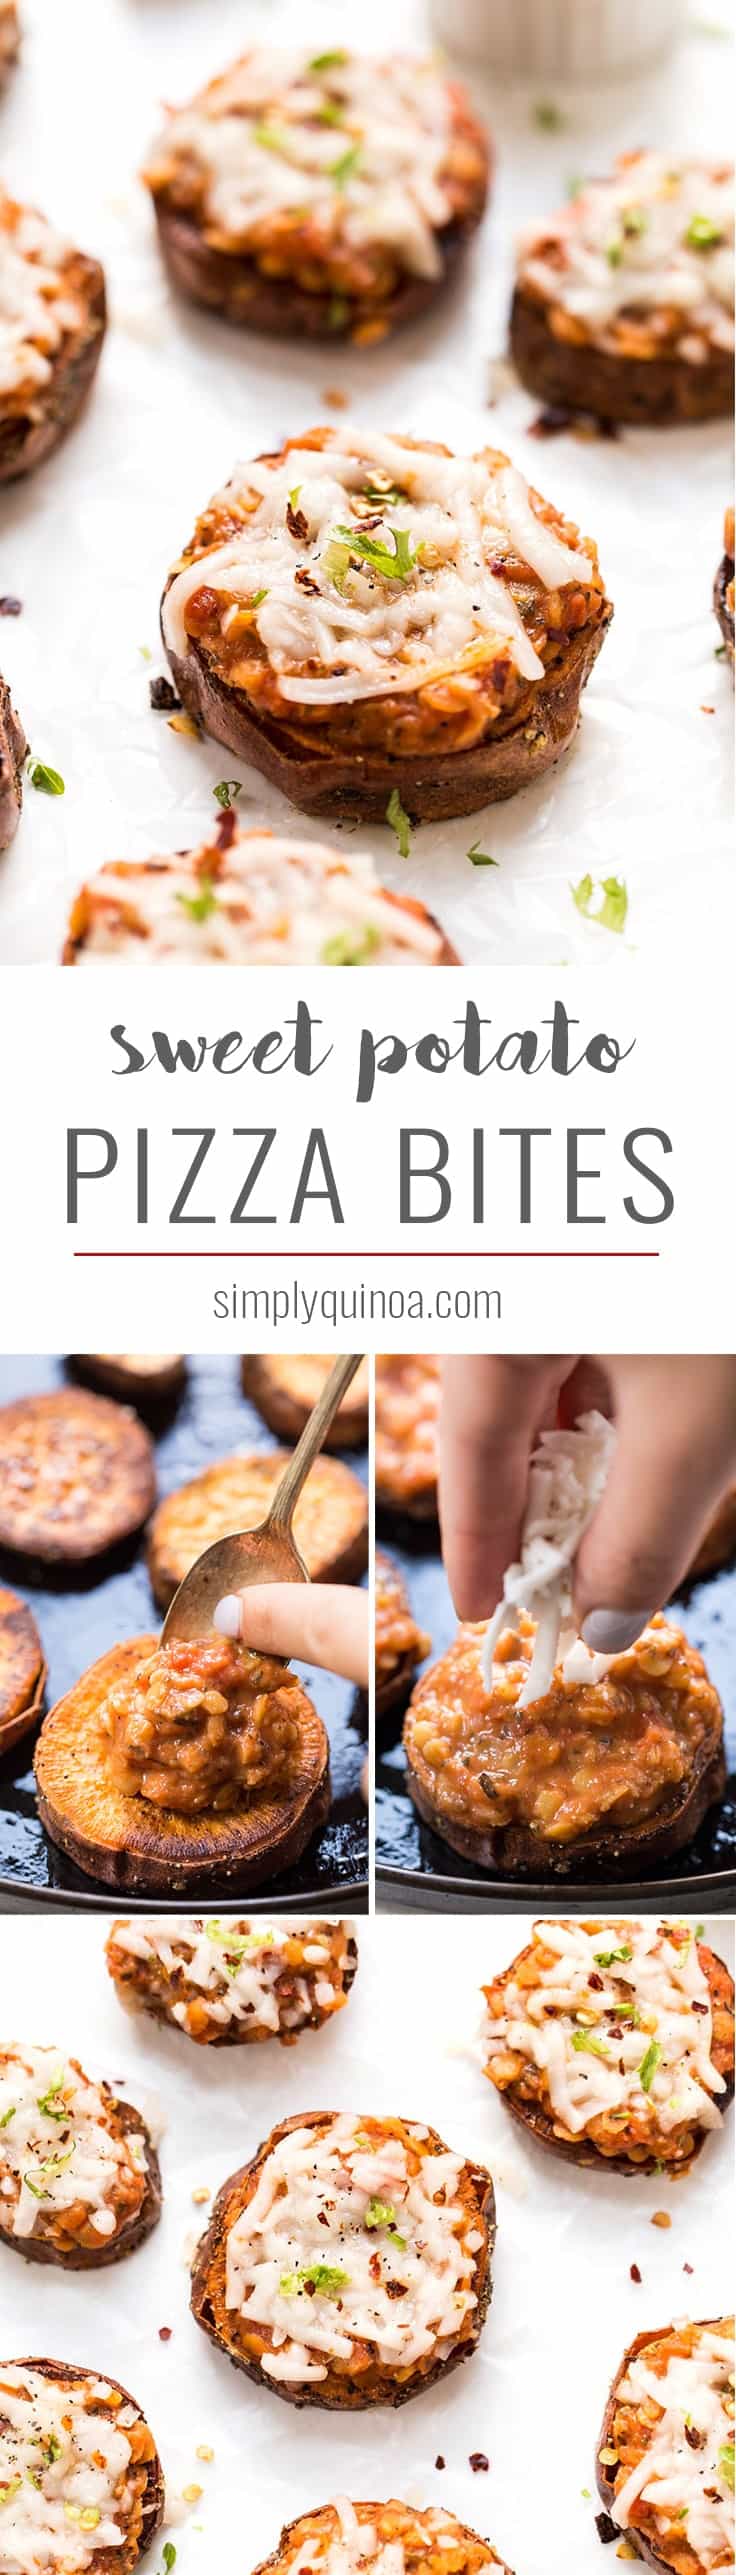 The HEALTHIEST twist on pizza ever! These SWEET POTATO PIZZA BITES are perfectly roasted, then topped with a lentil bolognese for a little perfect appetizer!